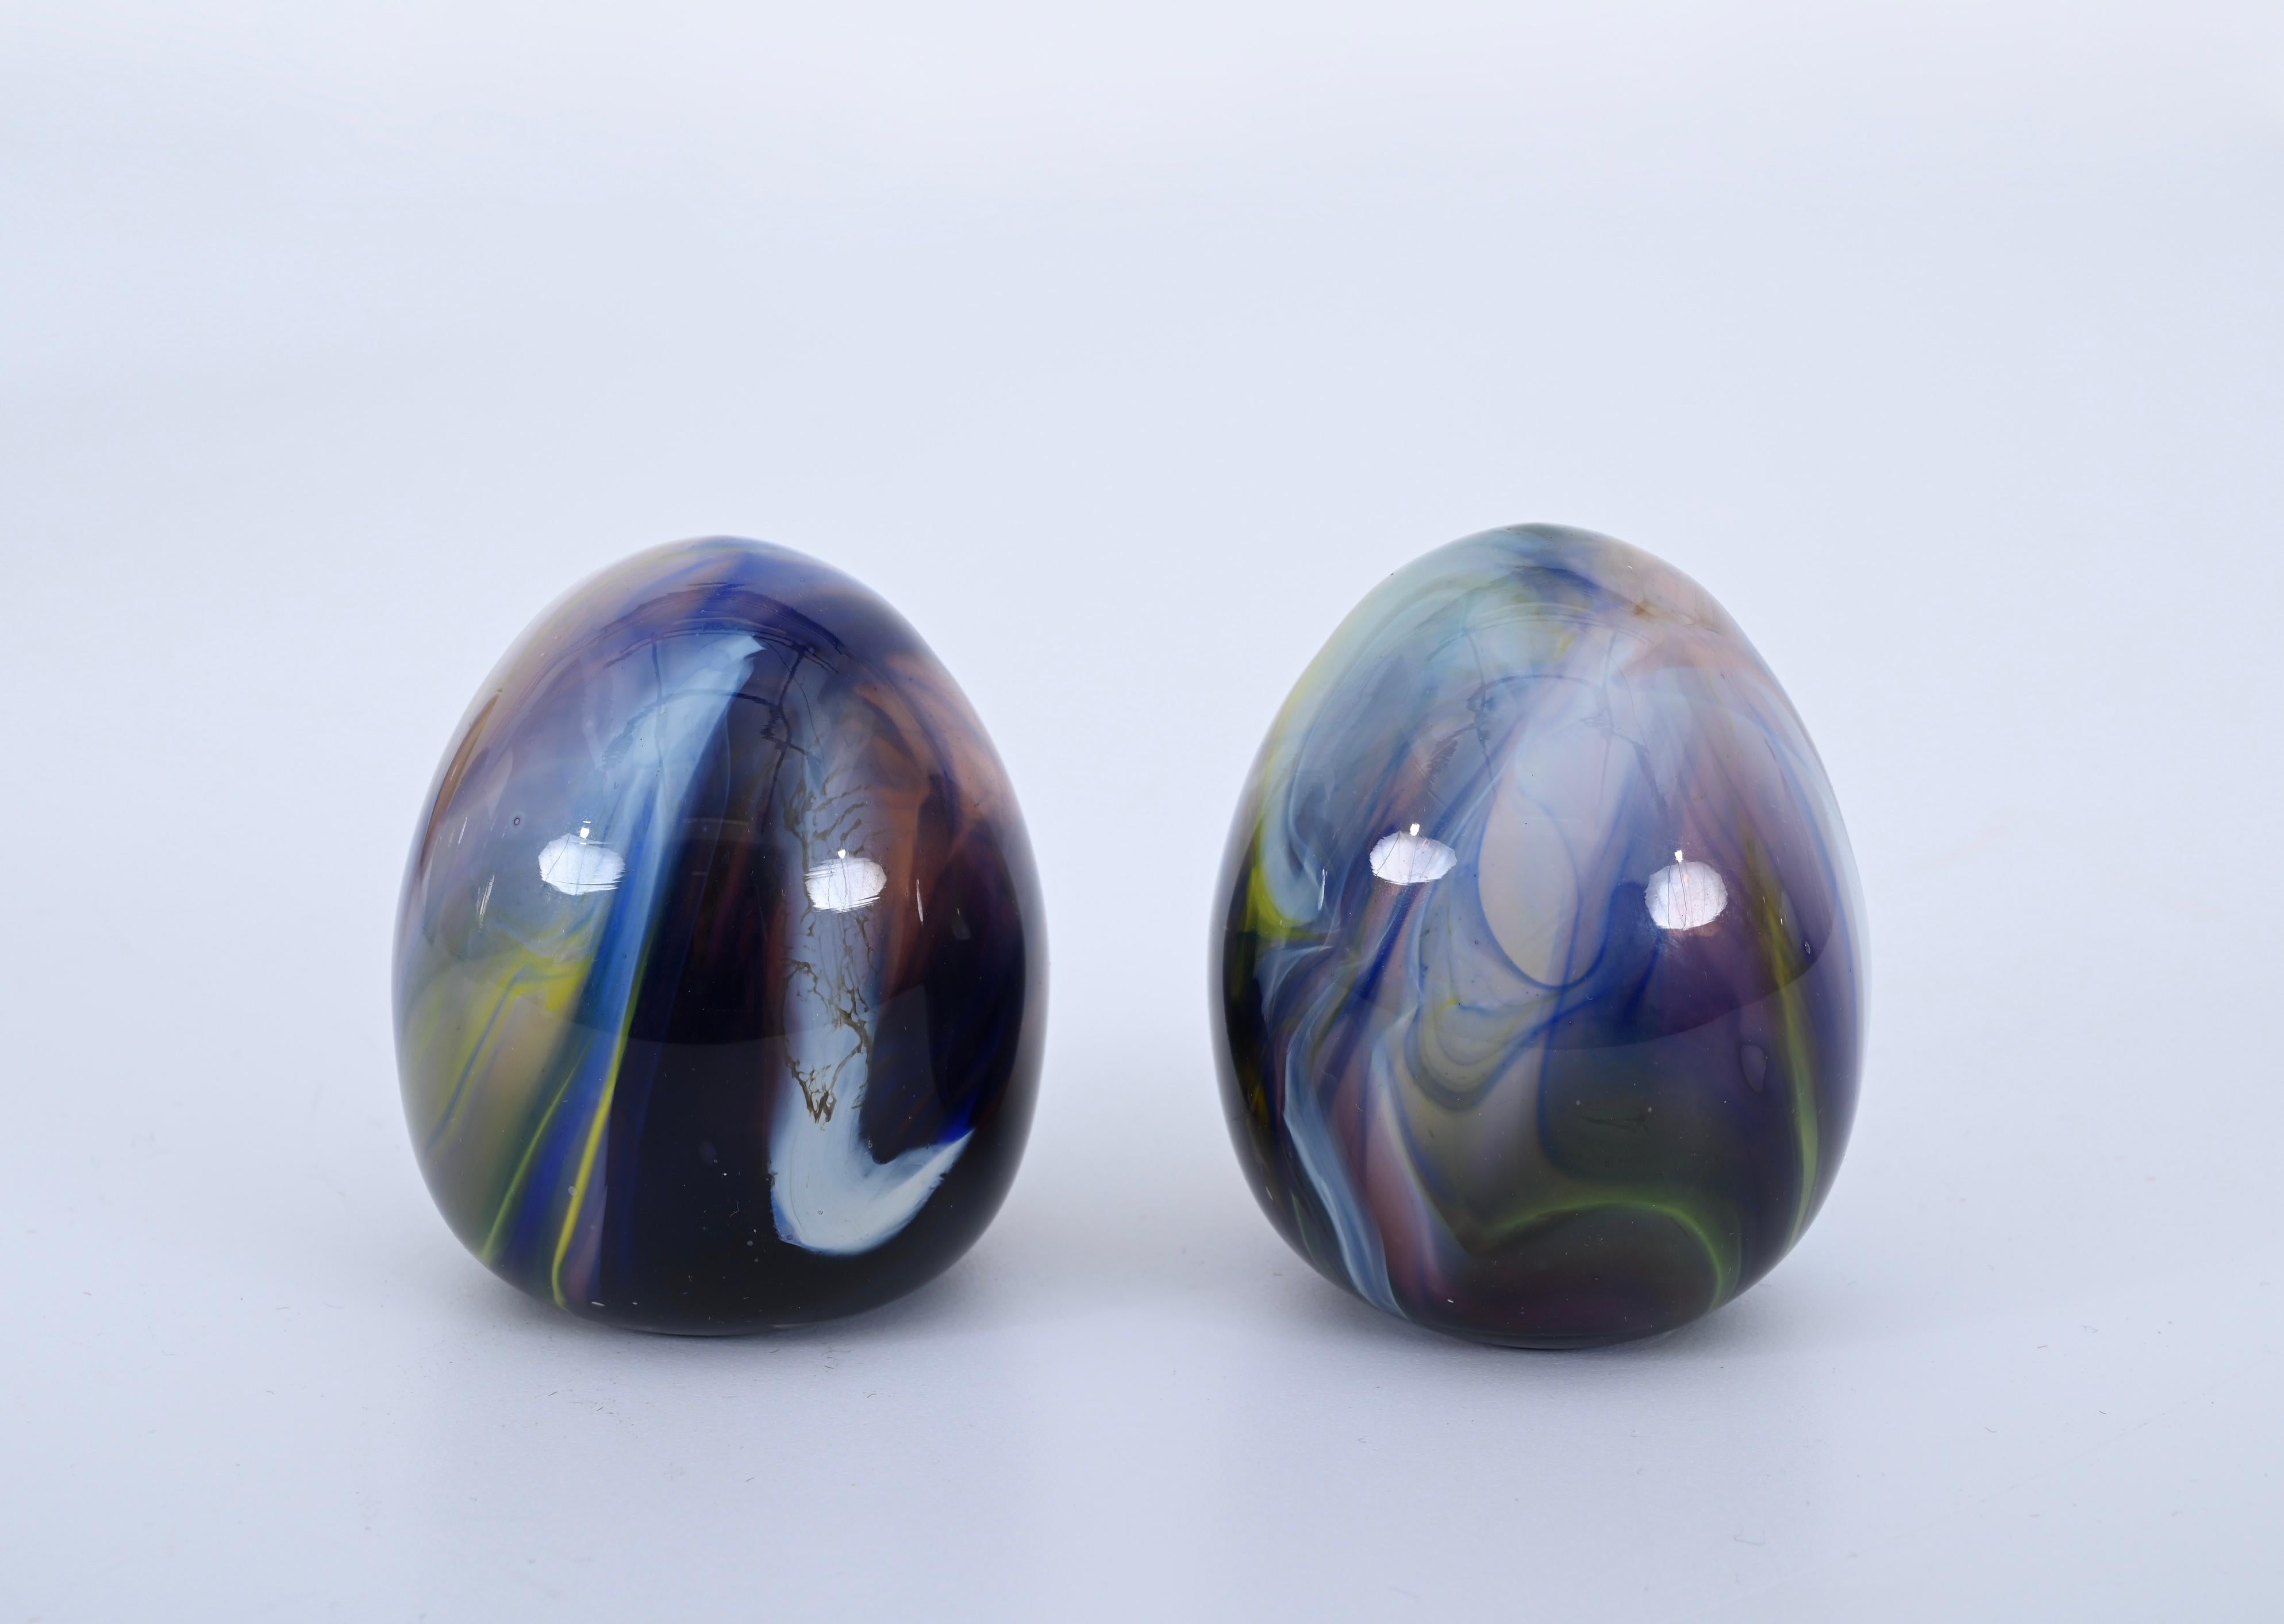 Set of Murano Hand-Blown Colored Glass Eggs, by Archimede Seguso, Italy, 1970s For Sale 5